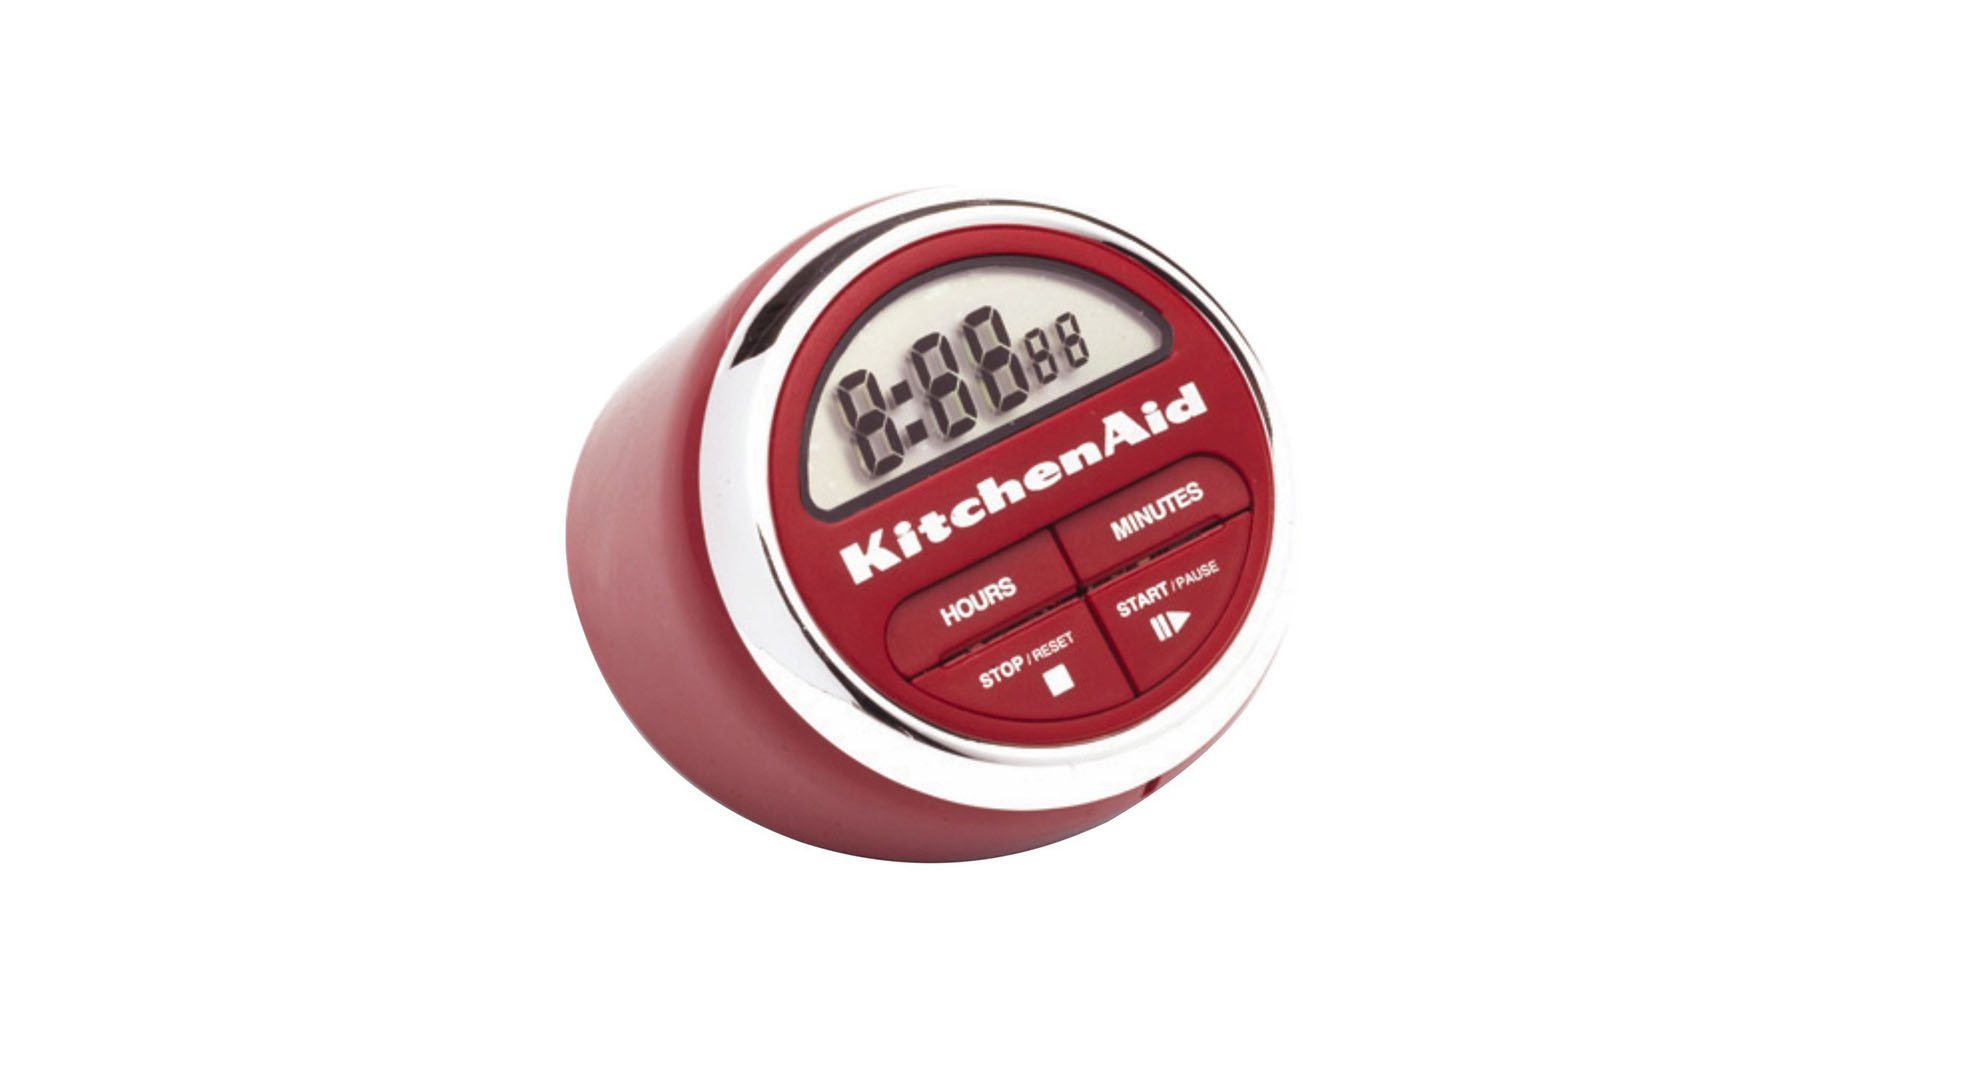 Today only: KitchenAid digital kitchen timer for $5.63